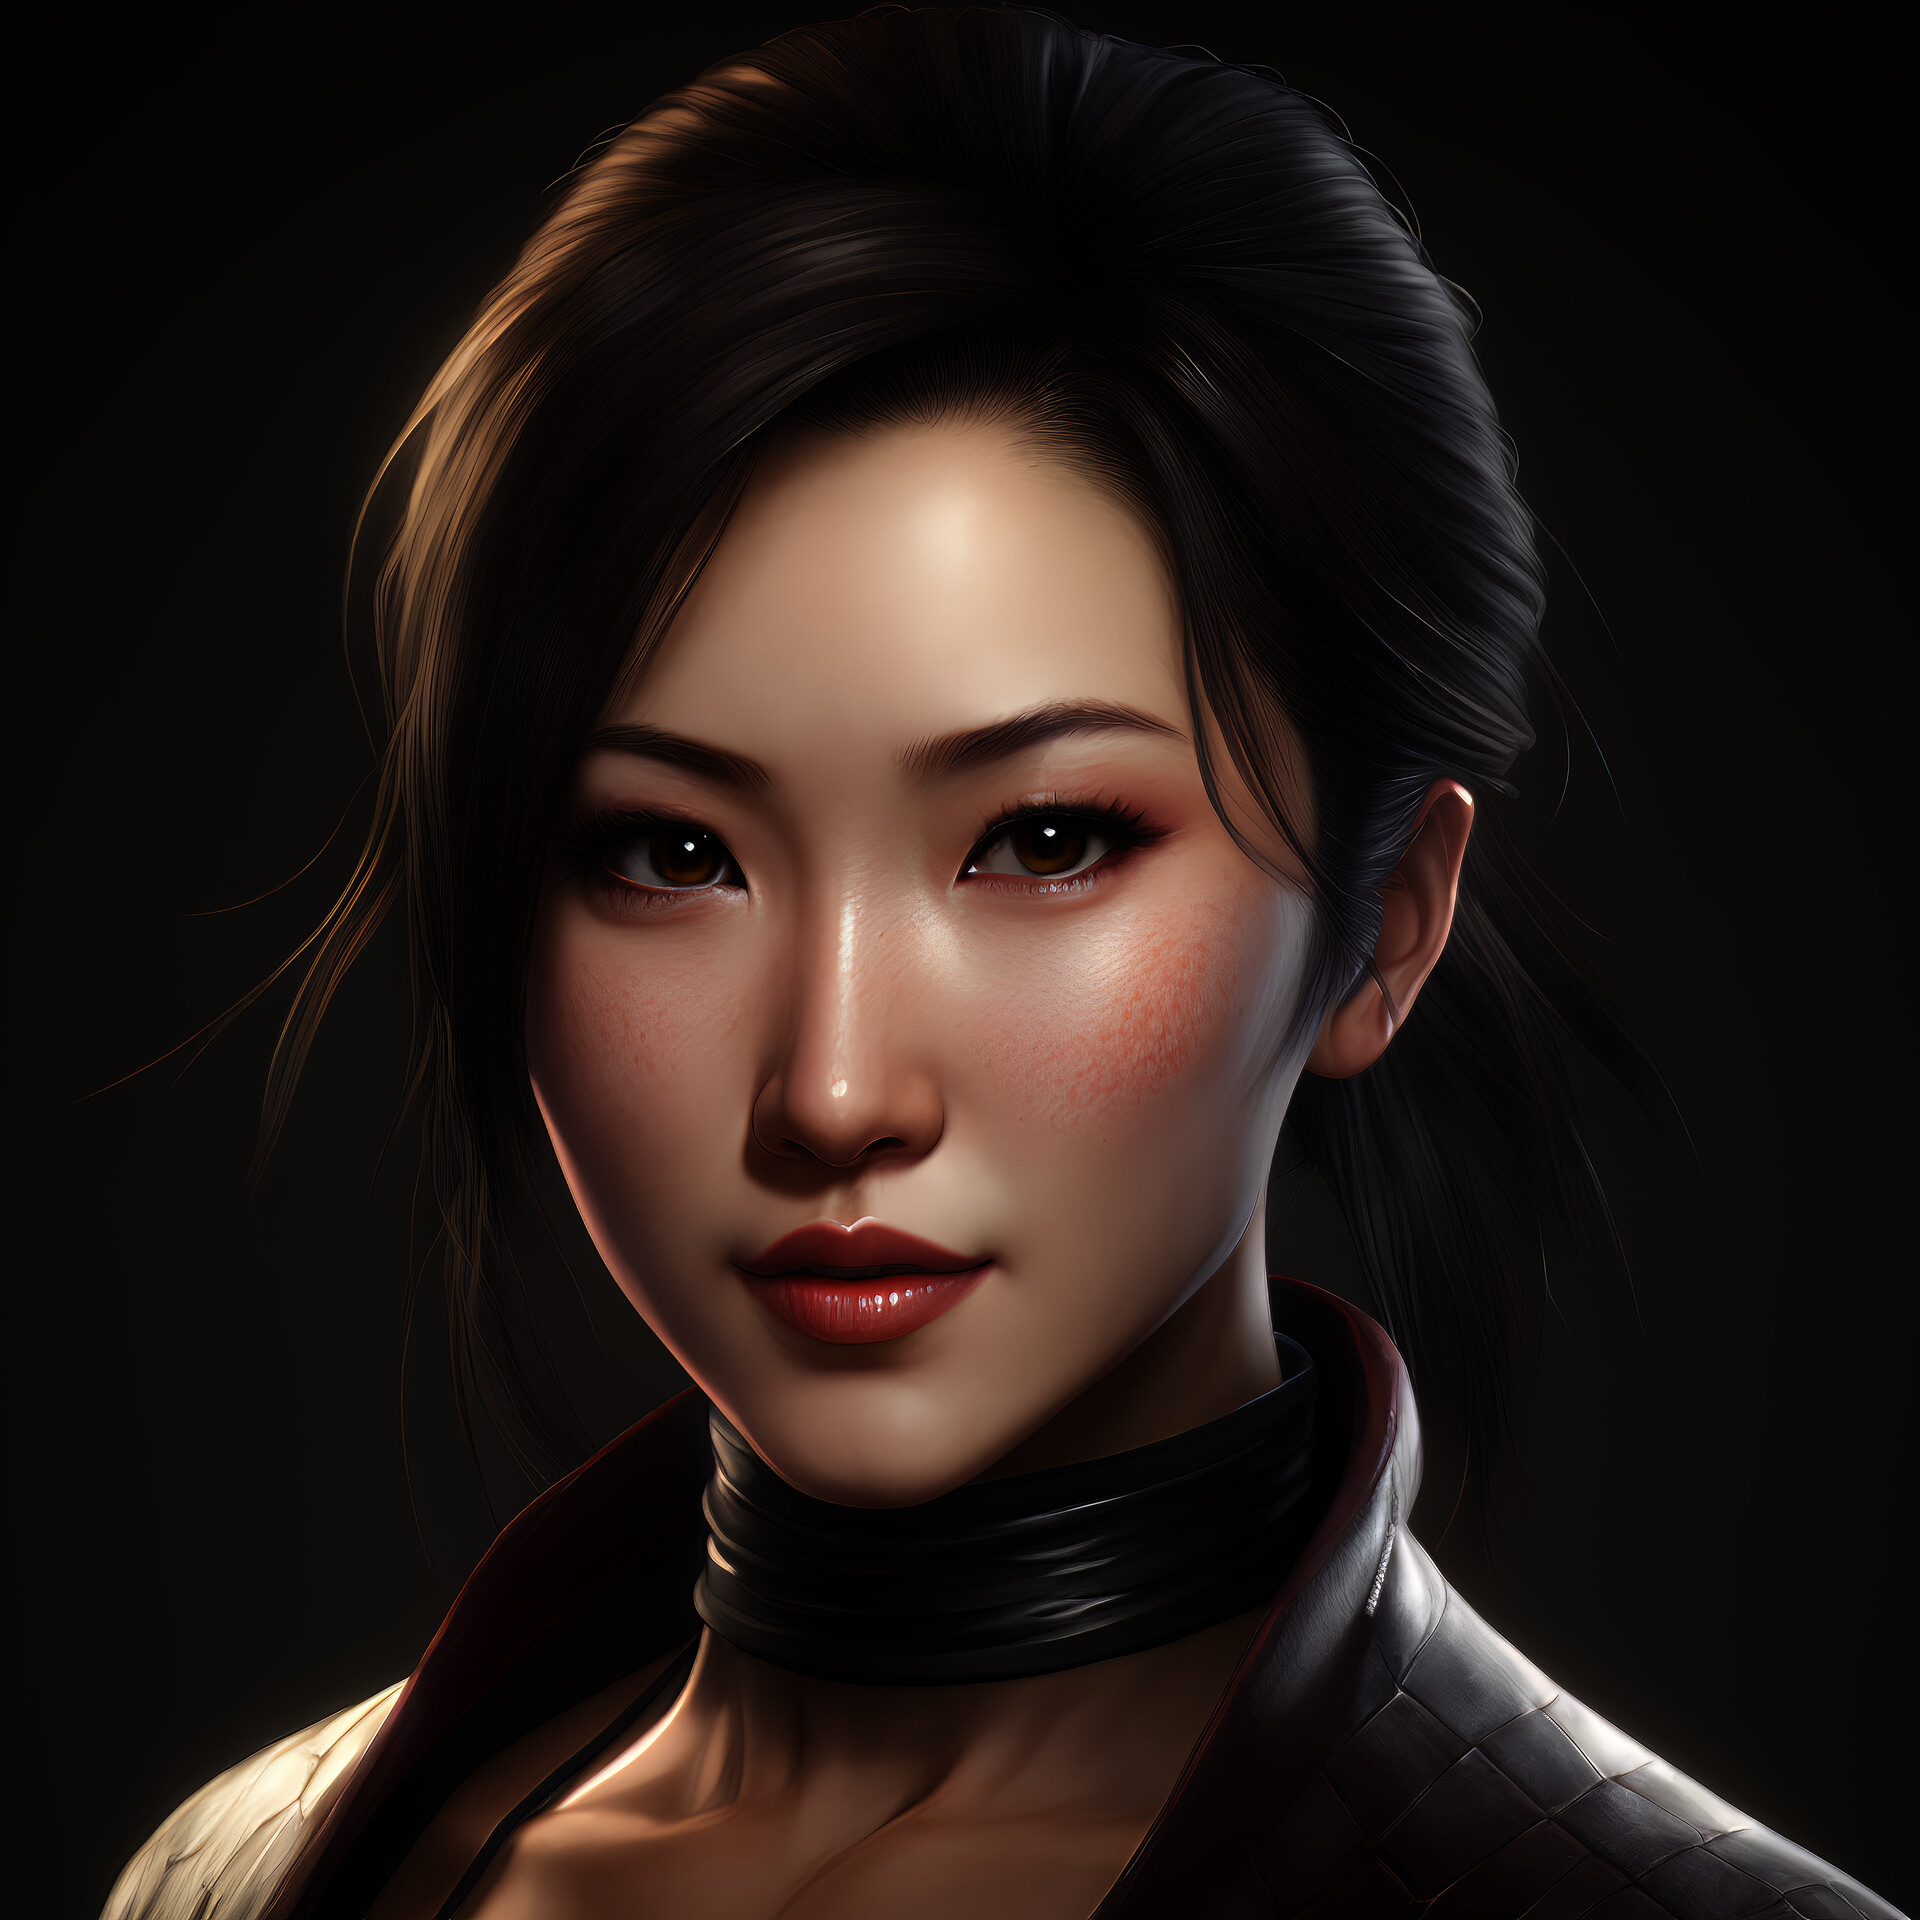 ArtStation - Realistic May Lee Jinju from The king of Fighters